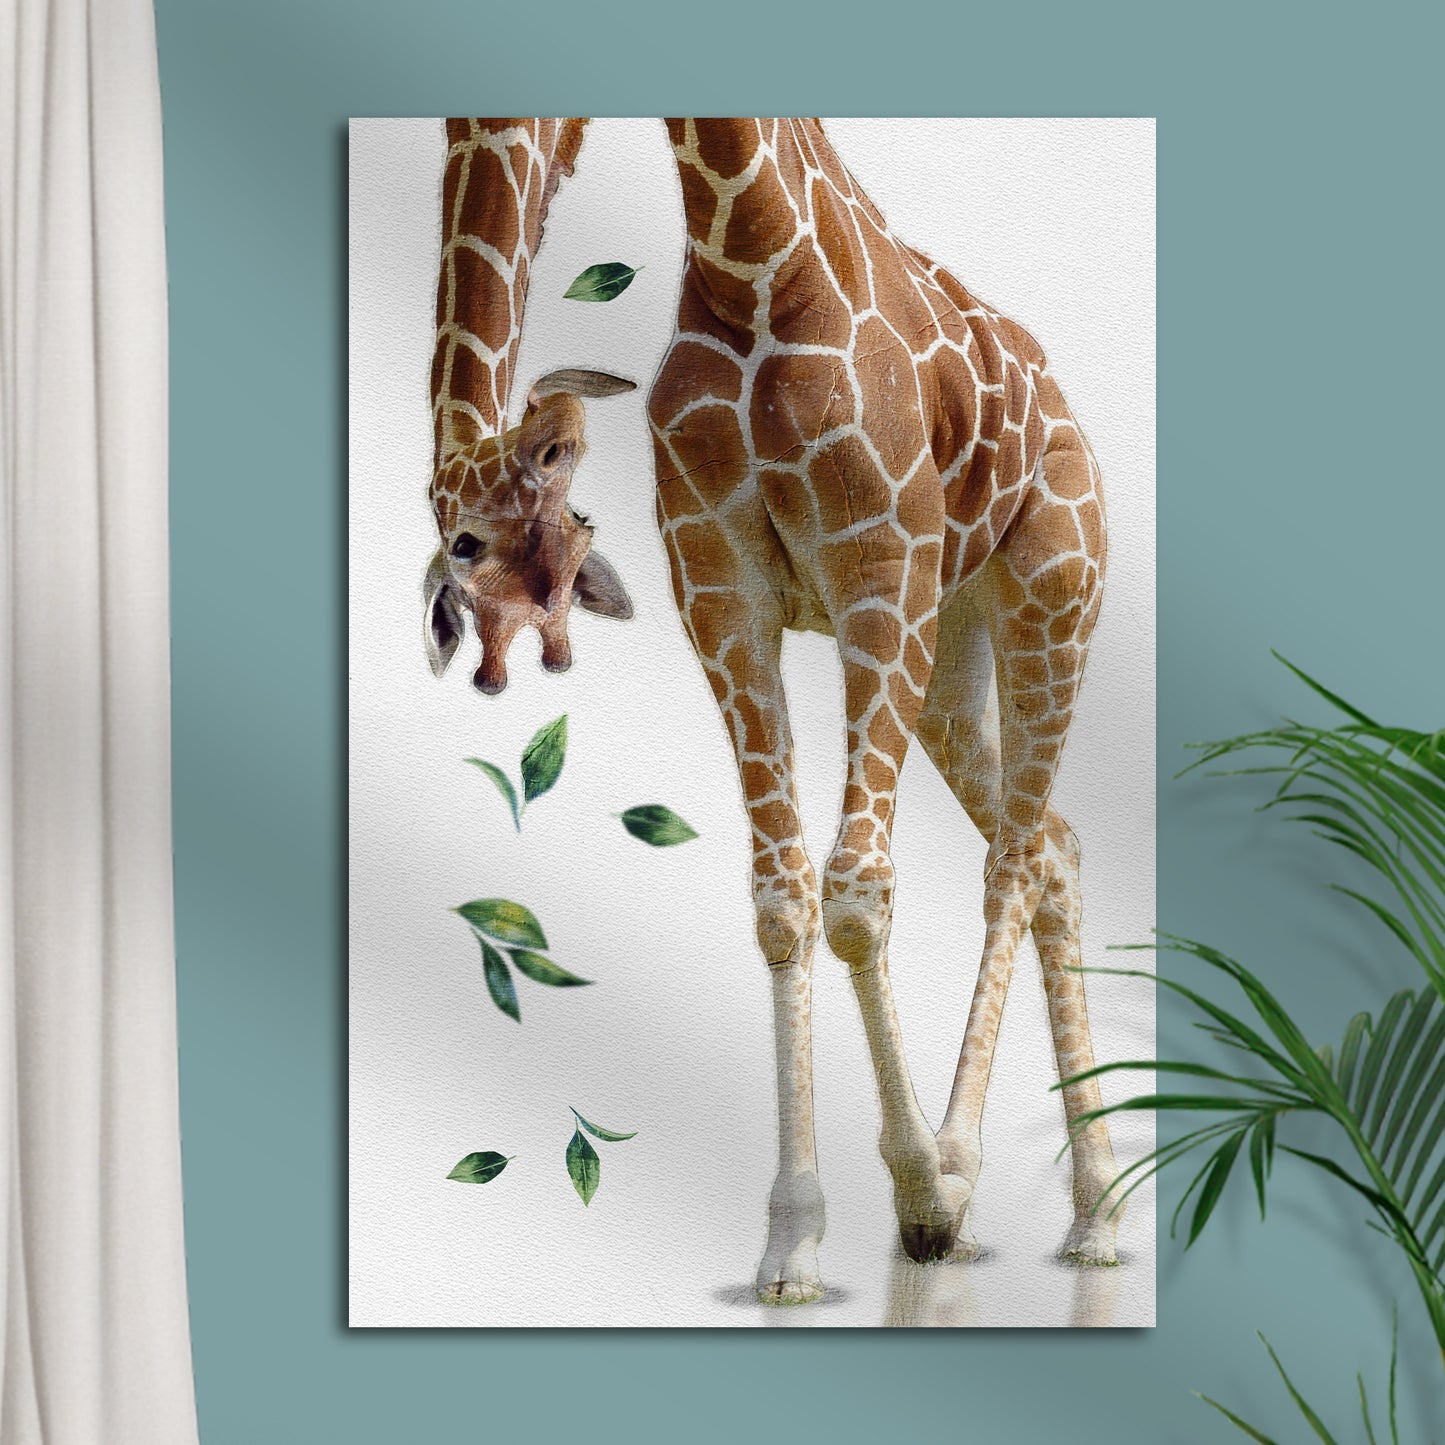 Upside Down Giraffe Head Portrait Canvas Wall Art  - Image by Tailored Canvases